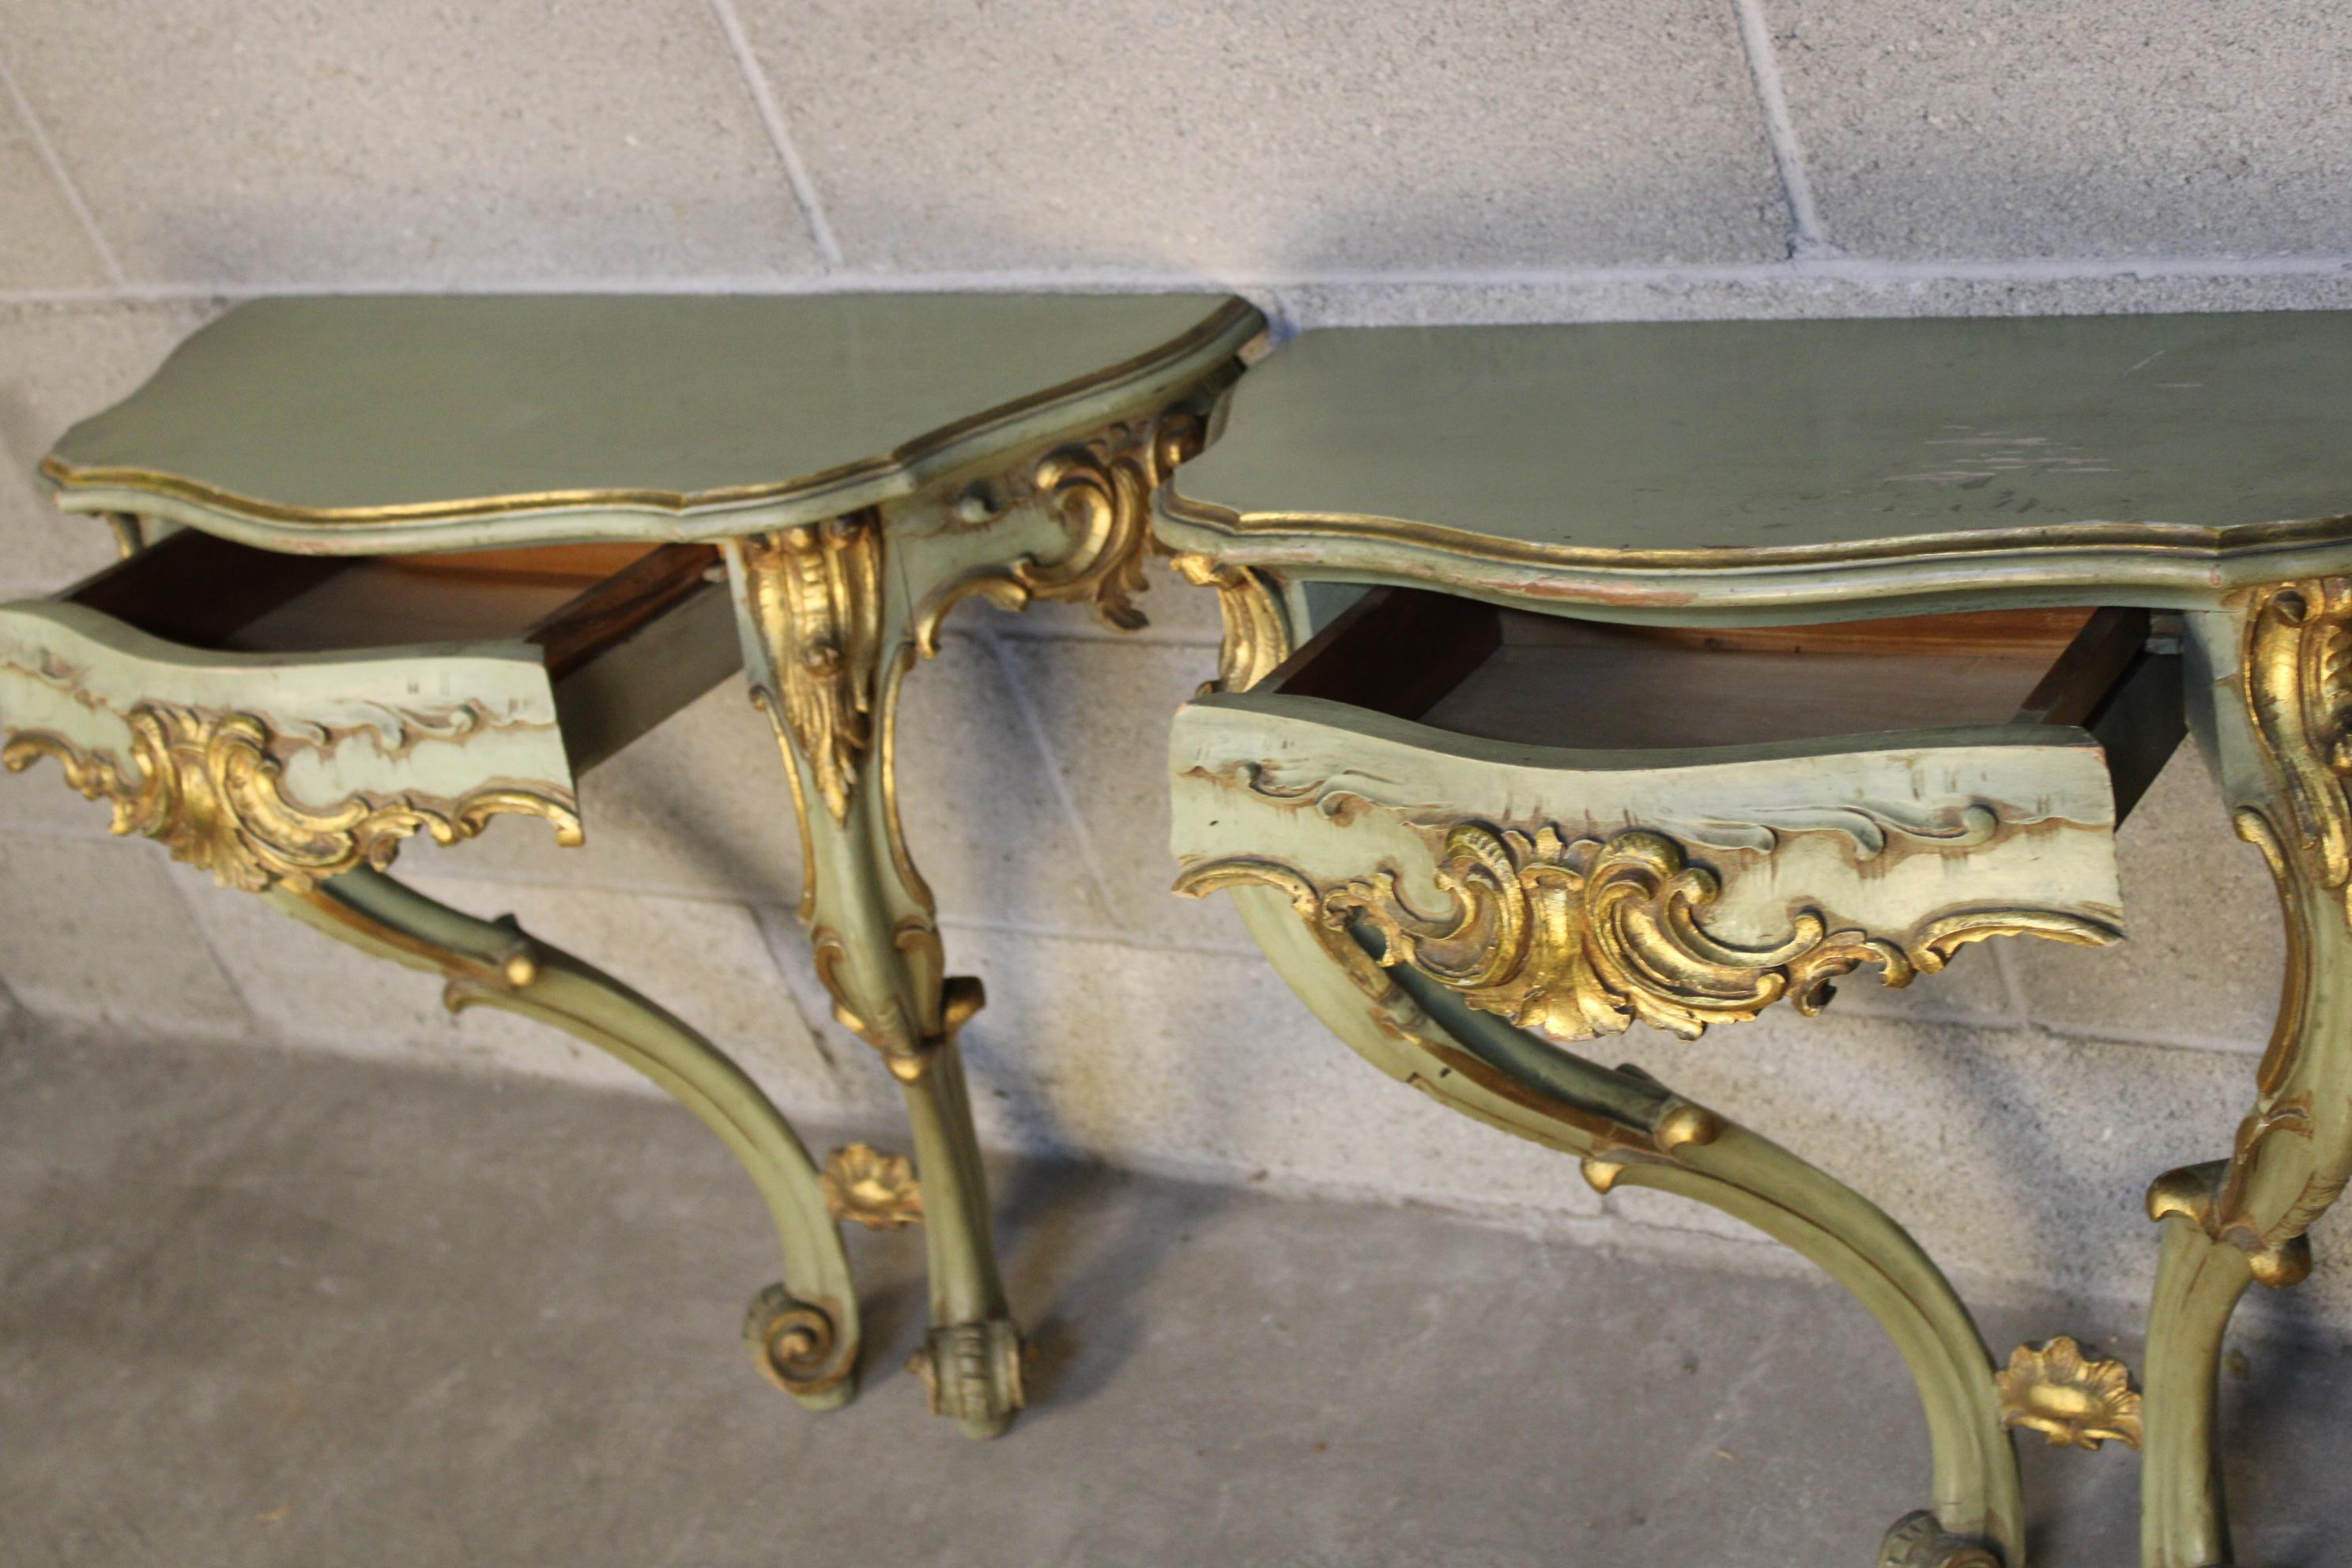 Pair of Late 19th century Italian Venetian gilded console tables.
Pair of Venetian console table in gilded, lacquered and painted with floral decorations wood. Hand carved. Circa 1850-1870 Venice, Italy / To hang on the wall, that can be easily